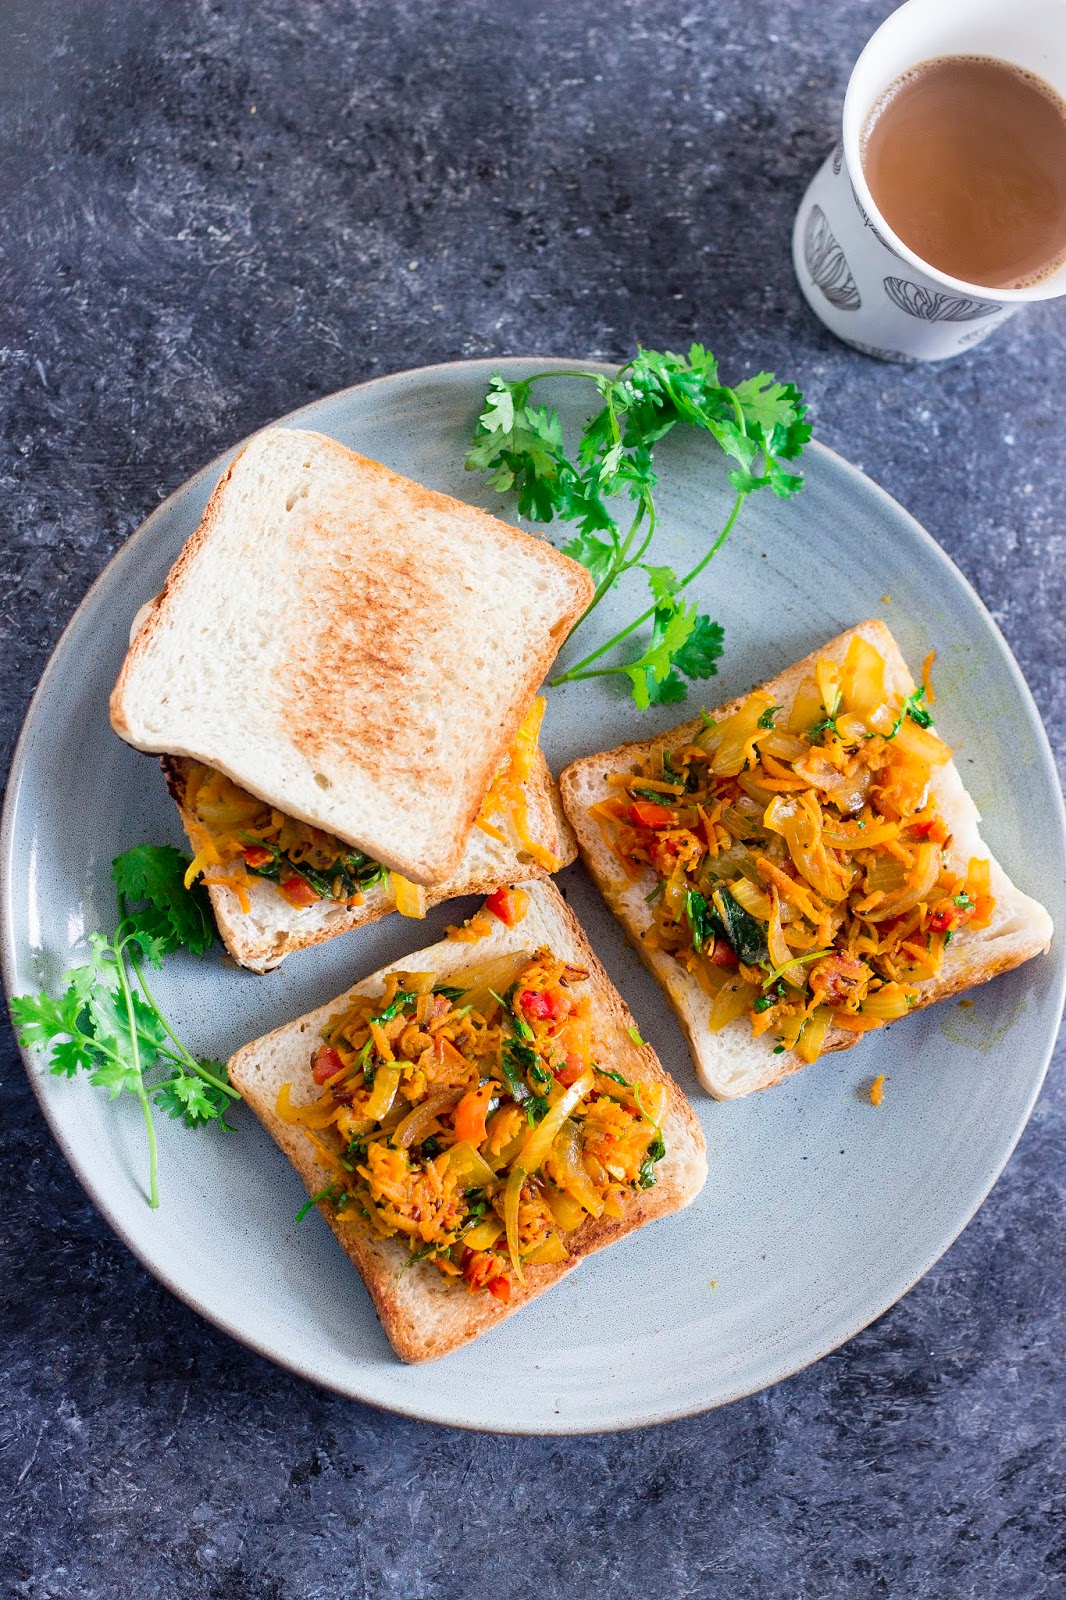 Bangalore Iyengar Bakery Style bread toast topped with an onion-carrot masala